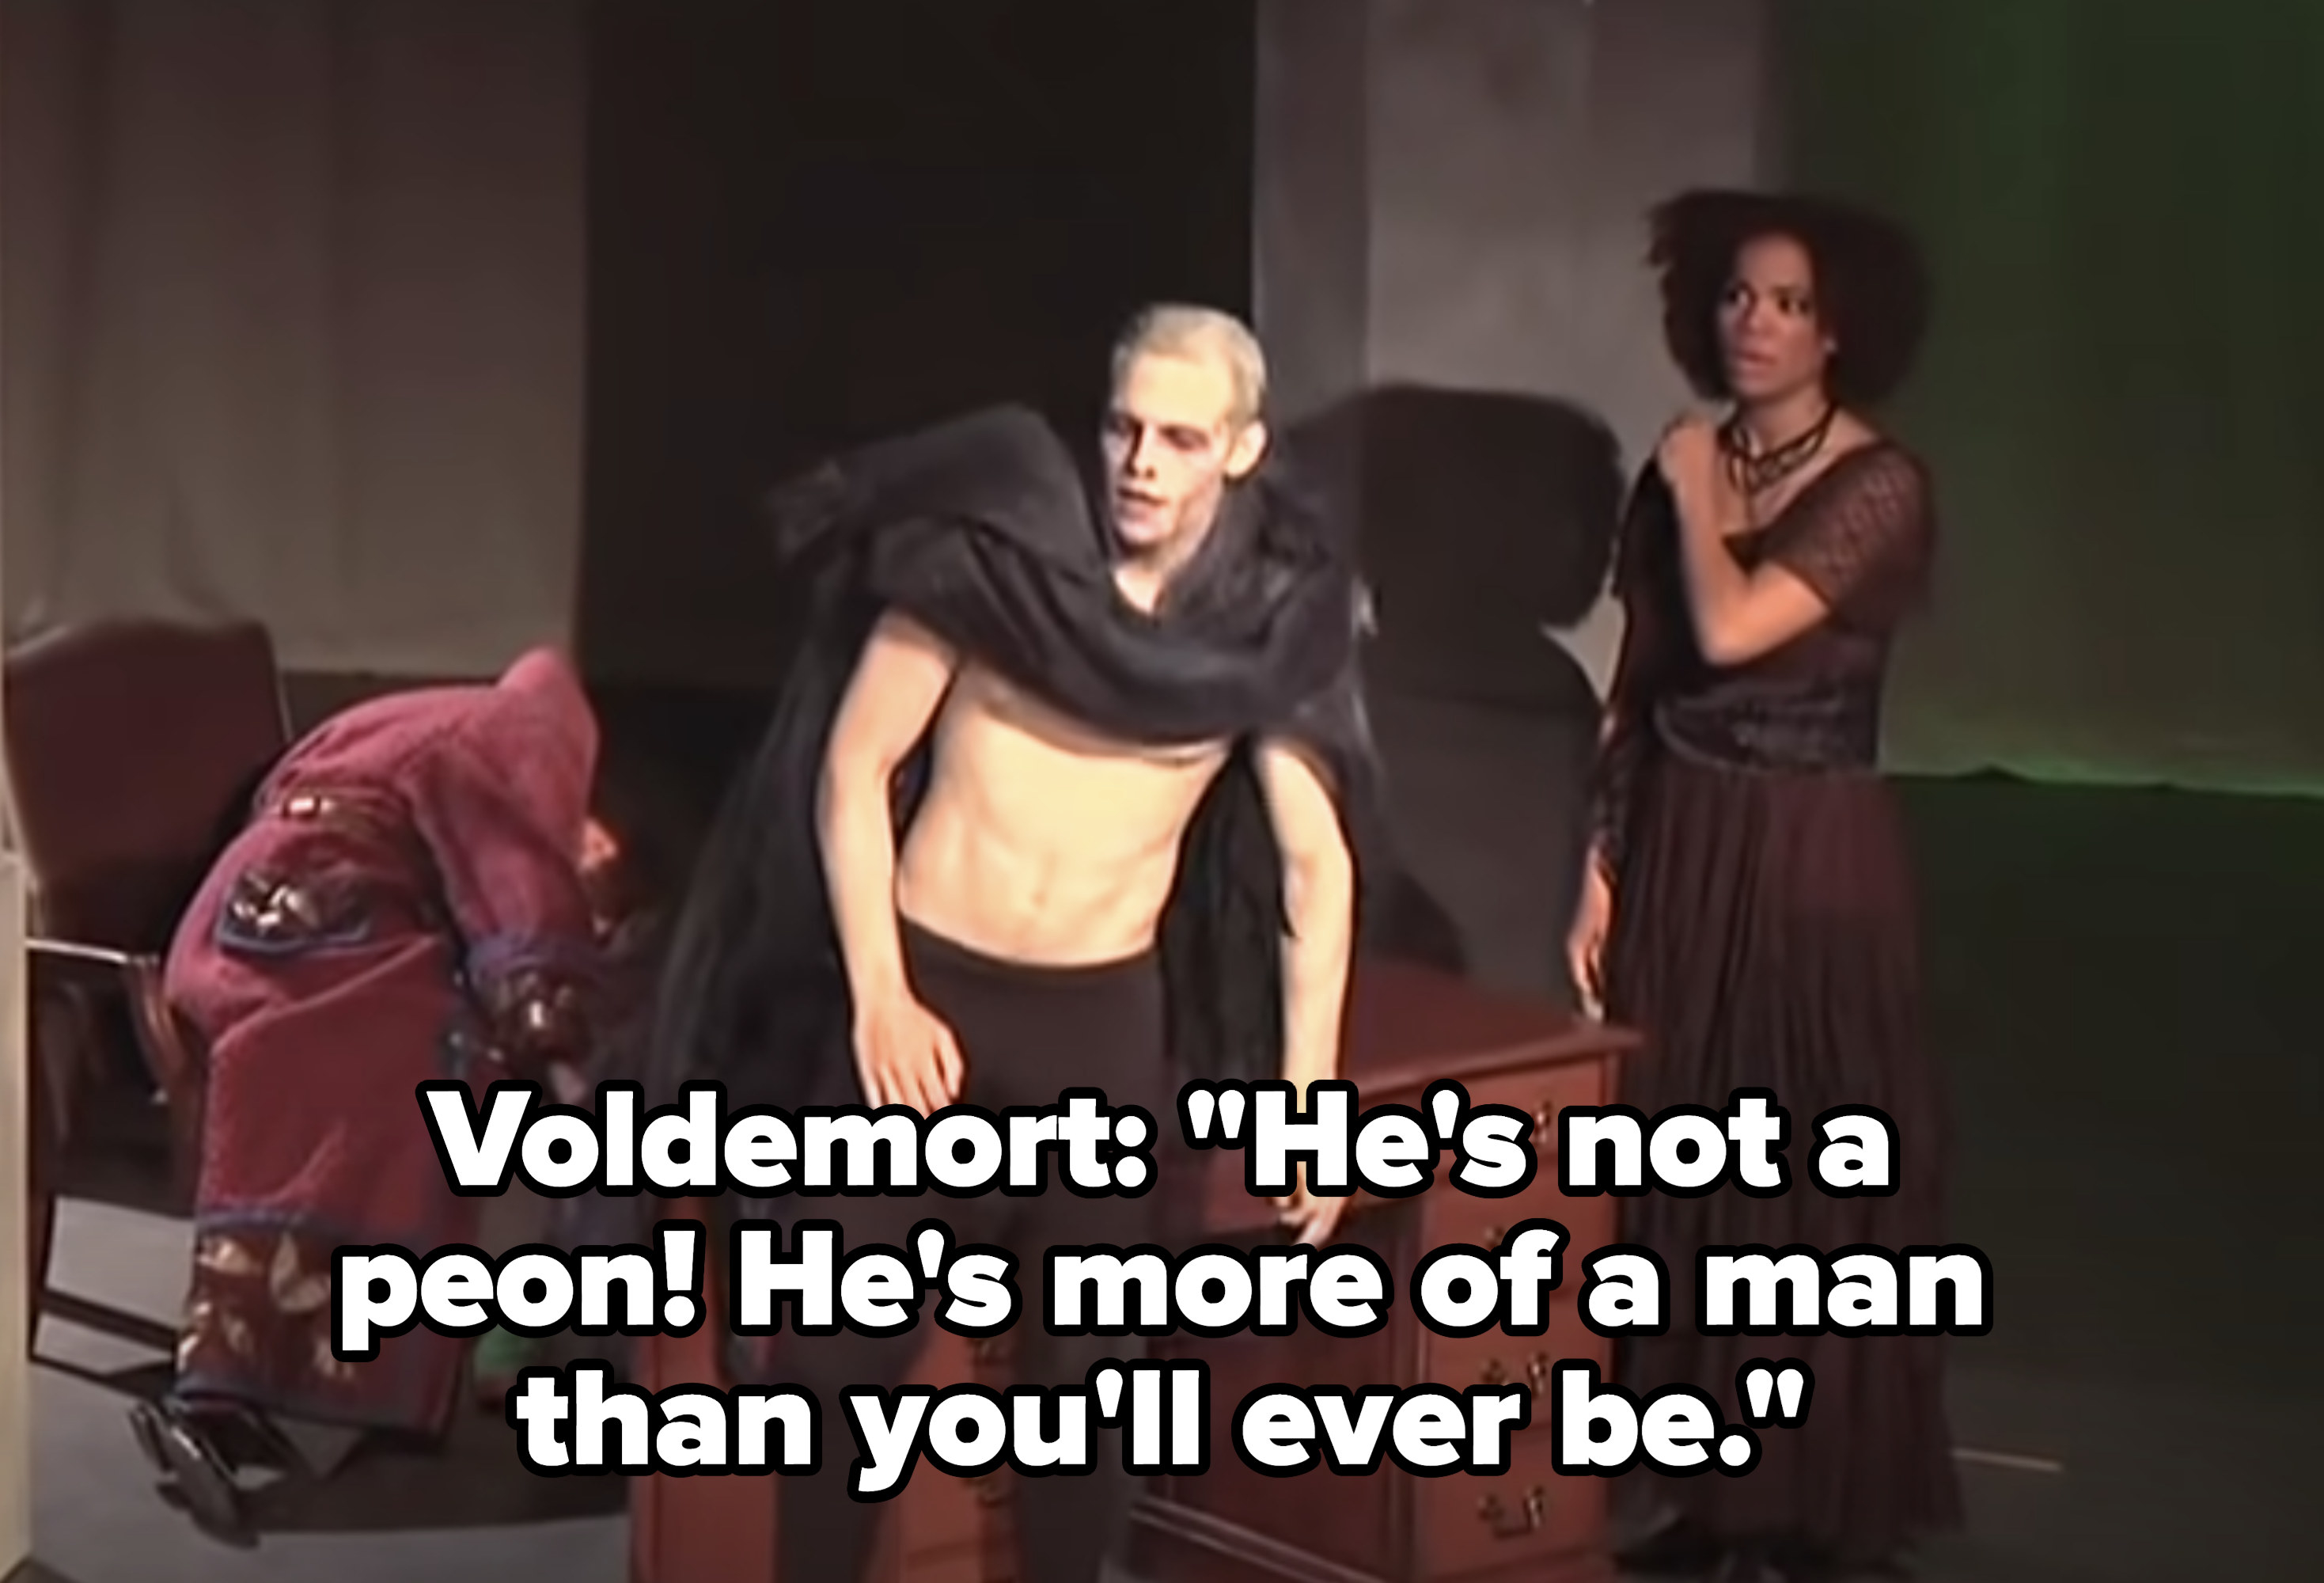 Voldemort: &quot;He&#x27;s not a peon! He&#x27;s more of a man than you&#x27;ll ever be.&quot;